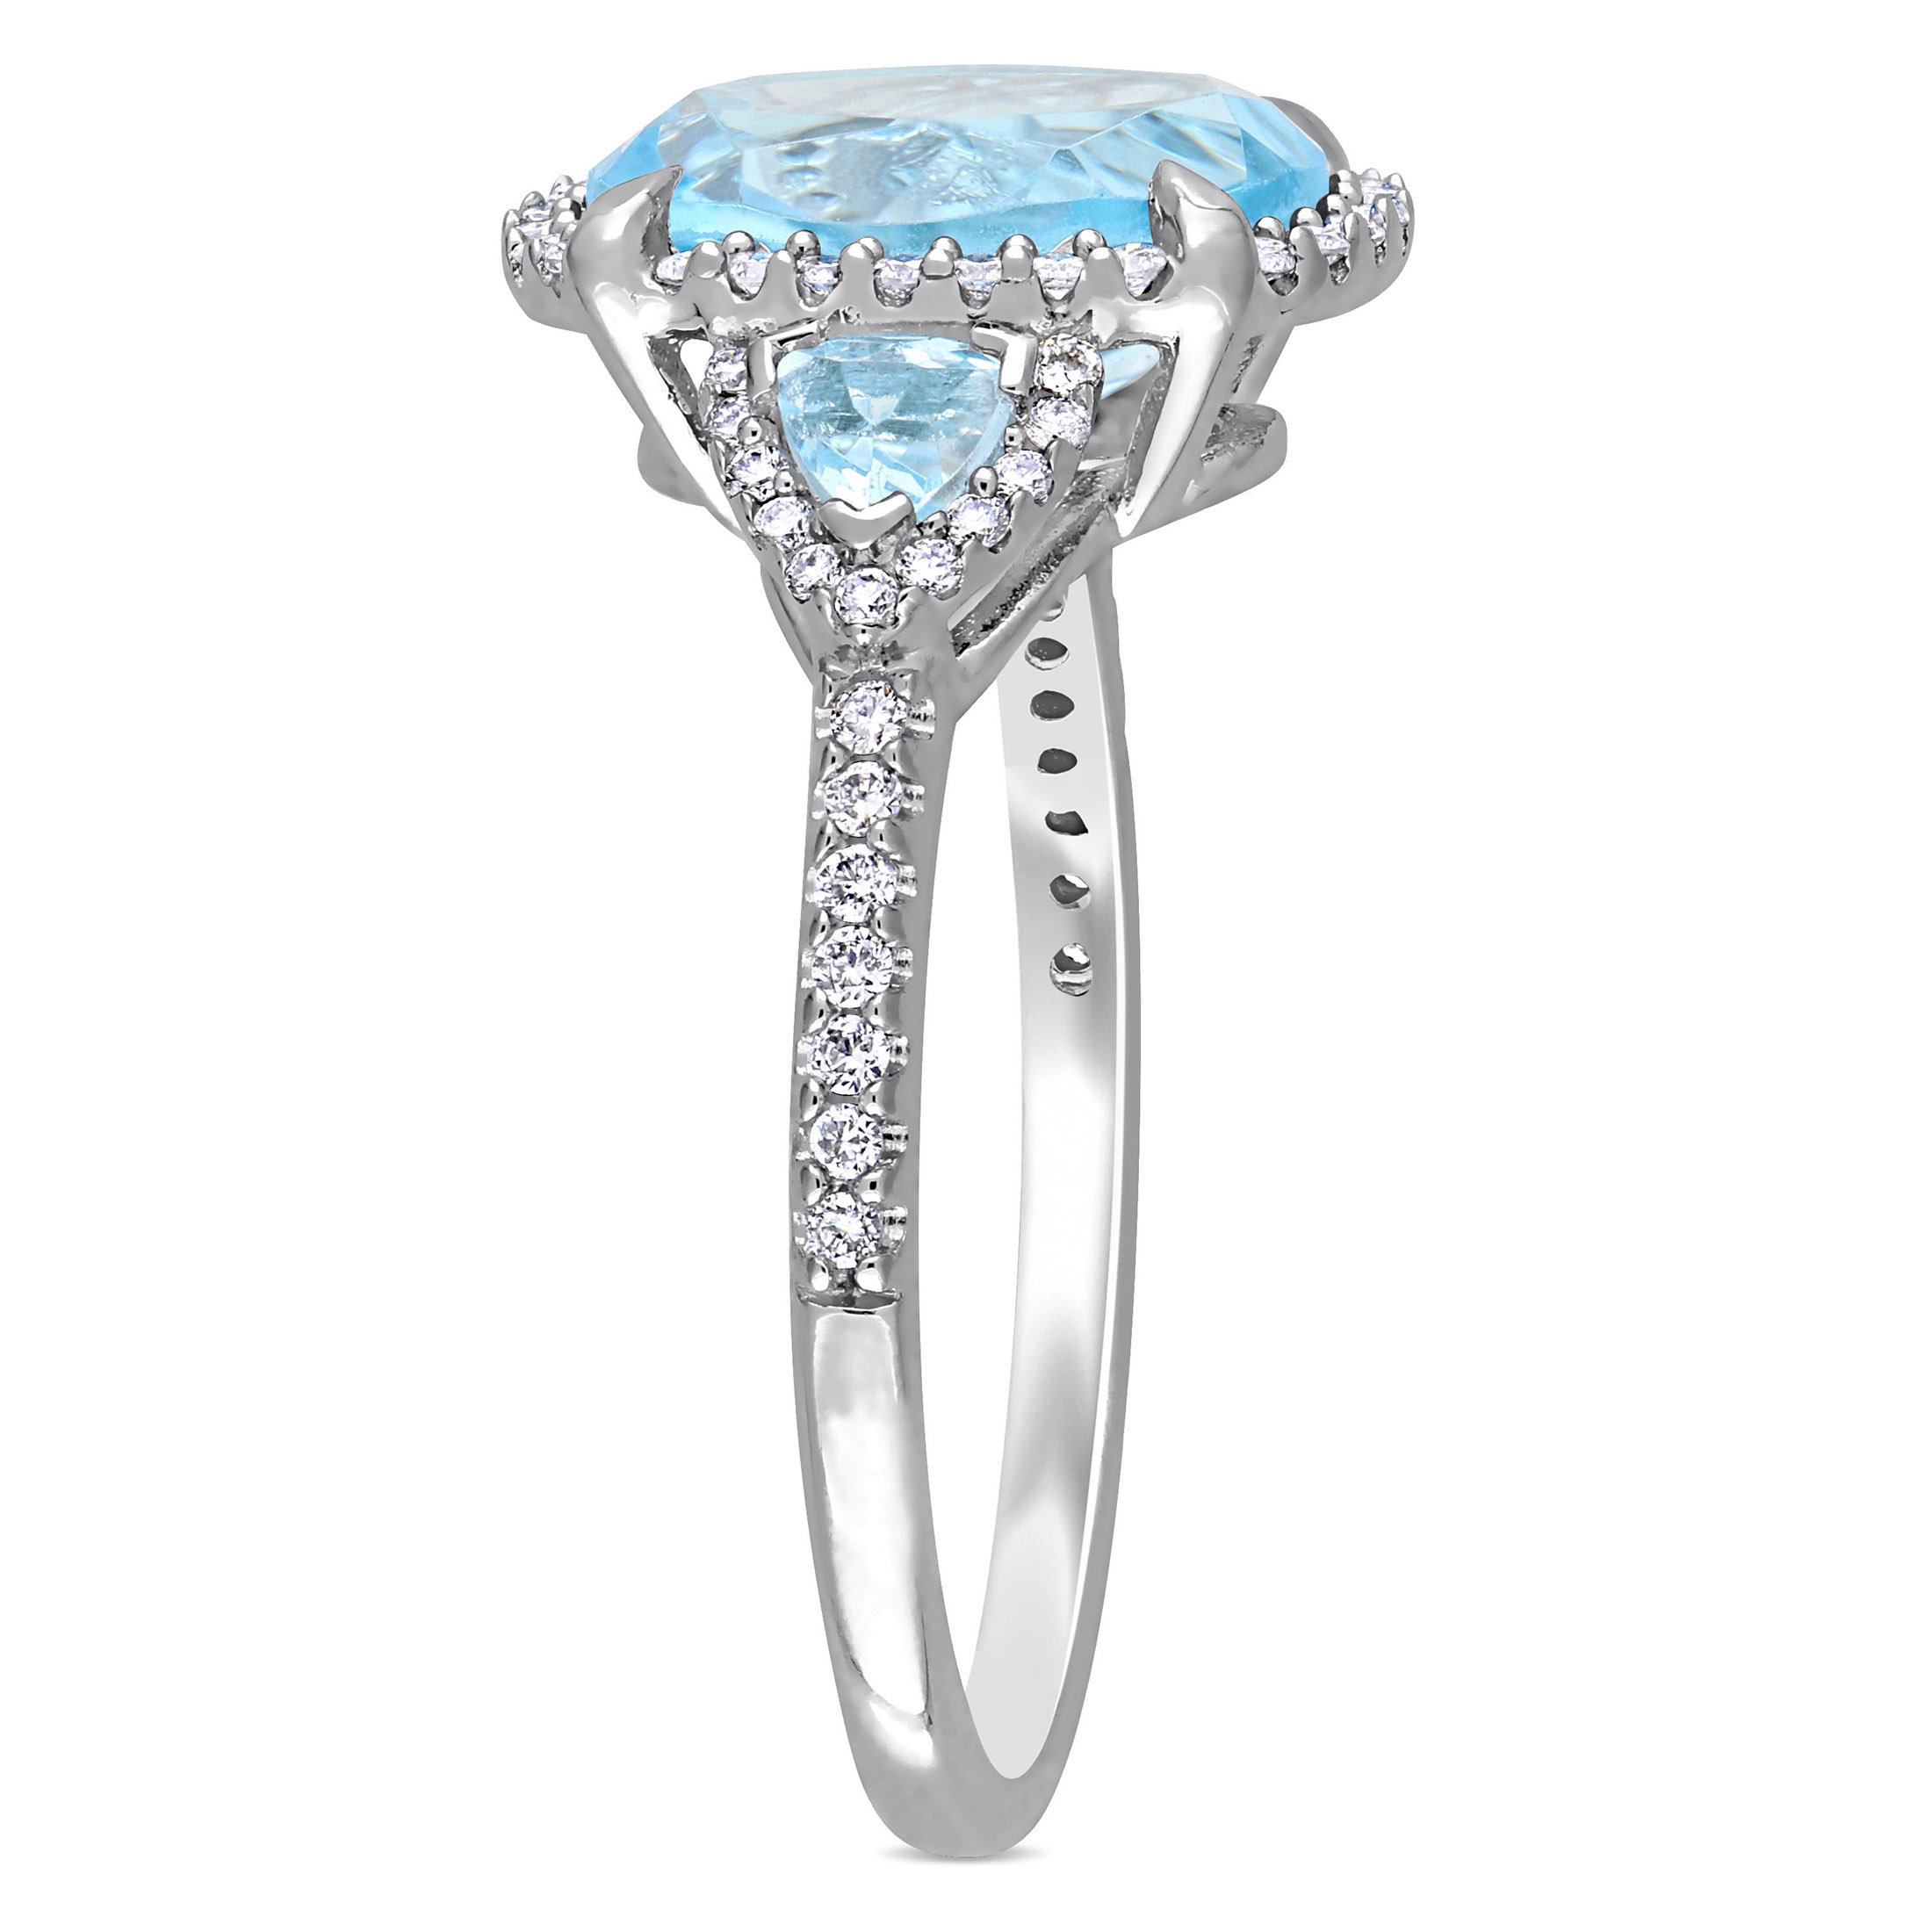 Miabella Women's 4 Carat T.G.W. Oval-Cut and Trilliant-Cut Sky Blue Topaz and 1/4 Carat T.W. Round-Cut Diamond 14kt White Gold Halo Ring - image 3 of 8